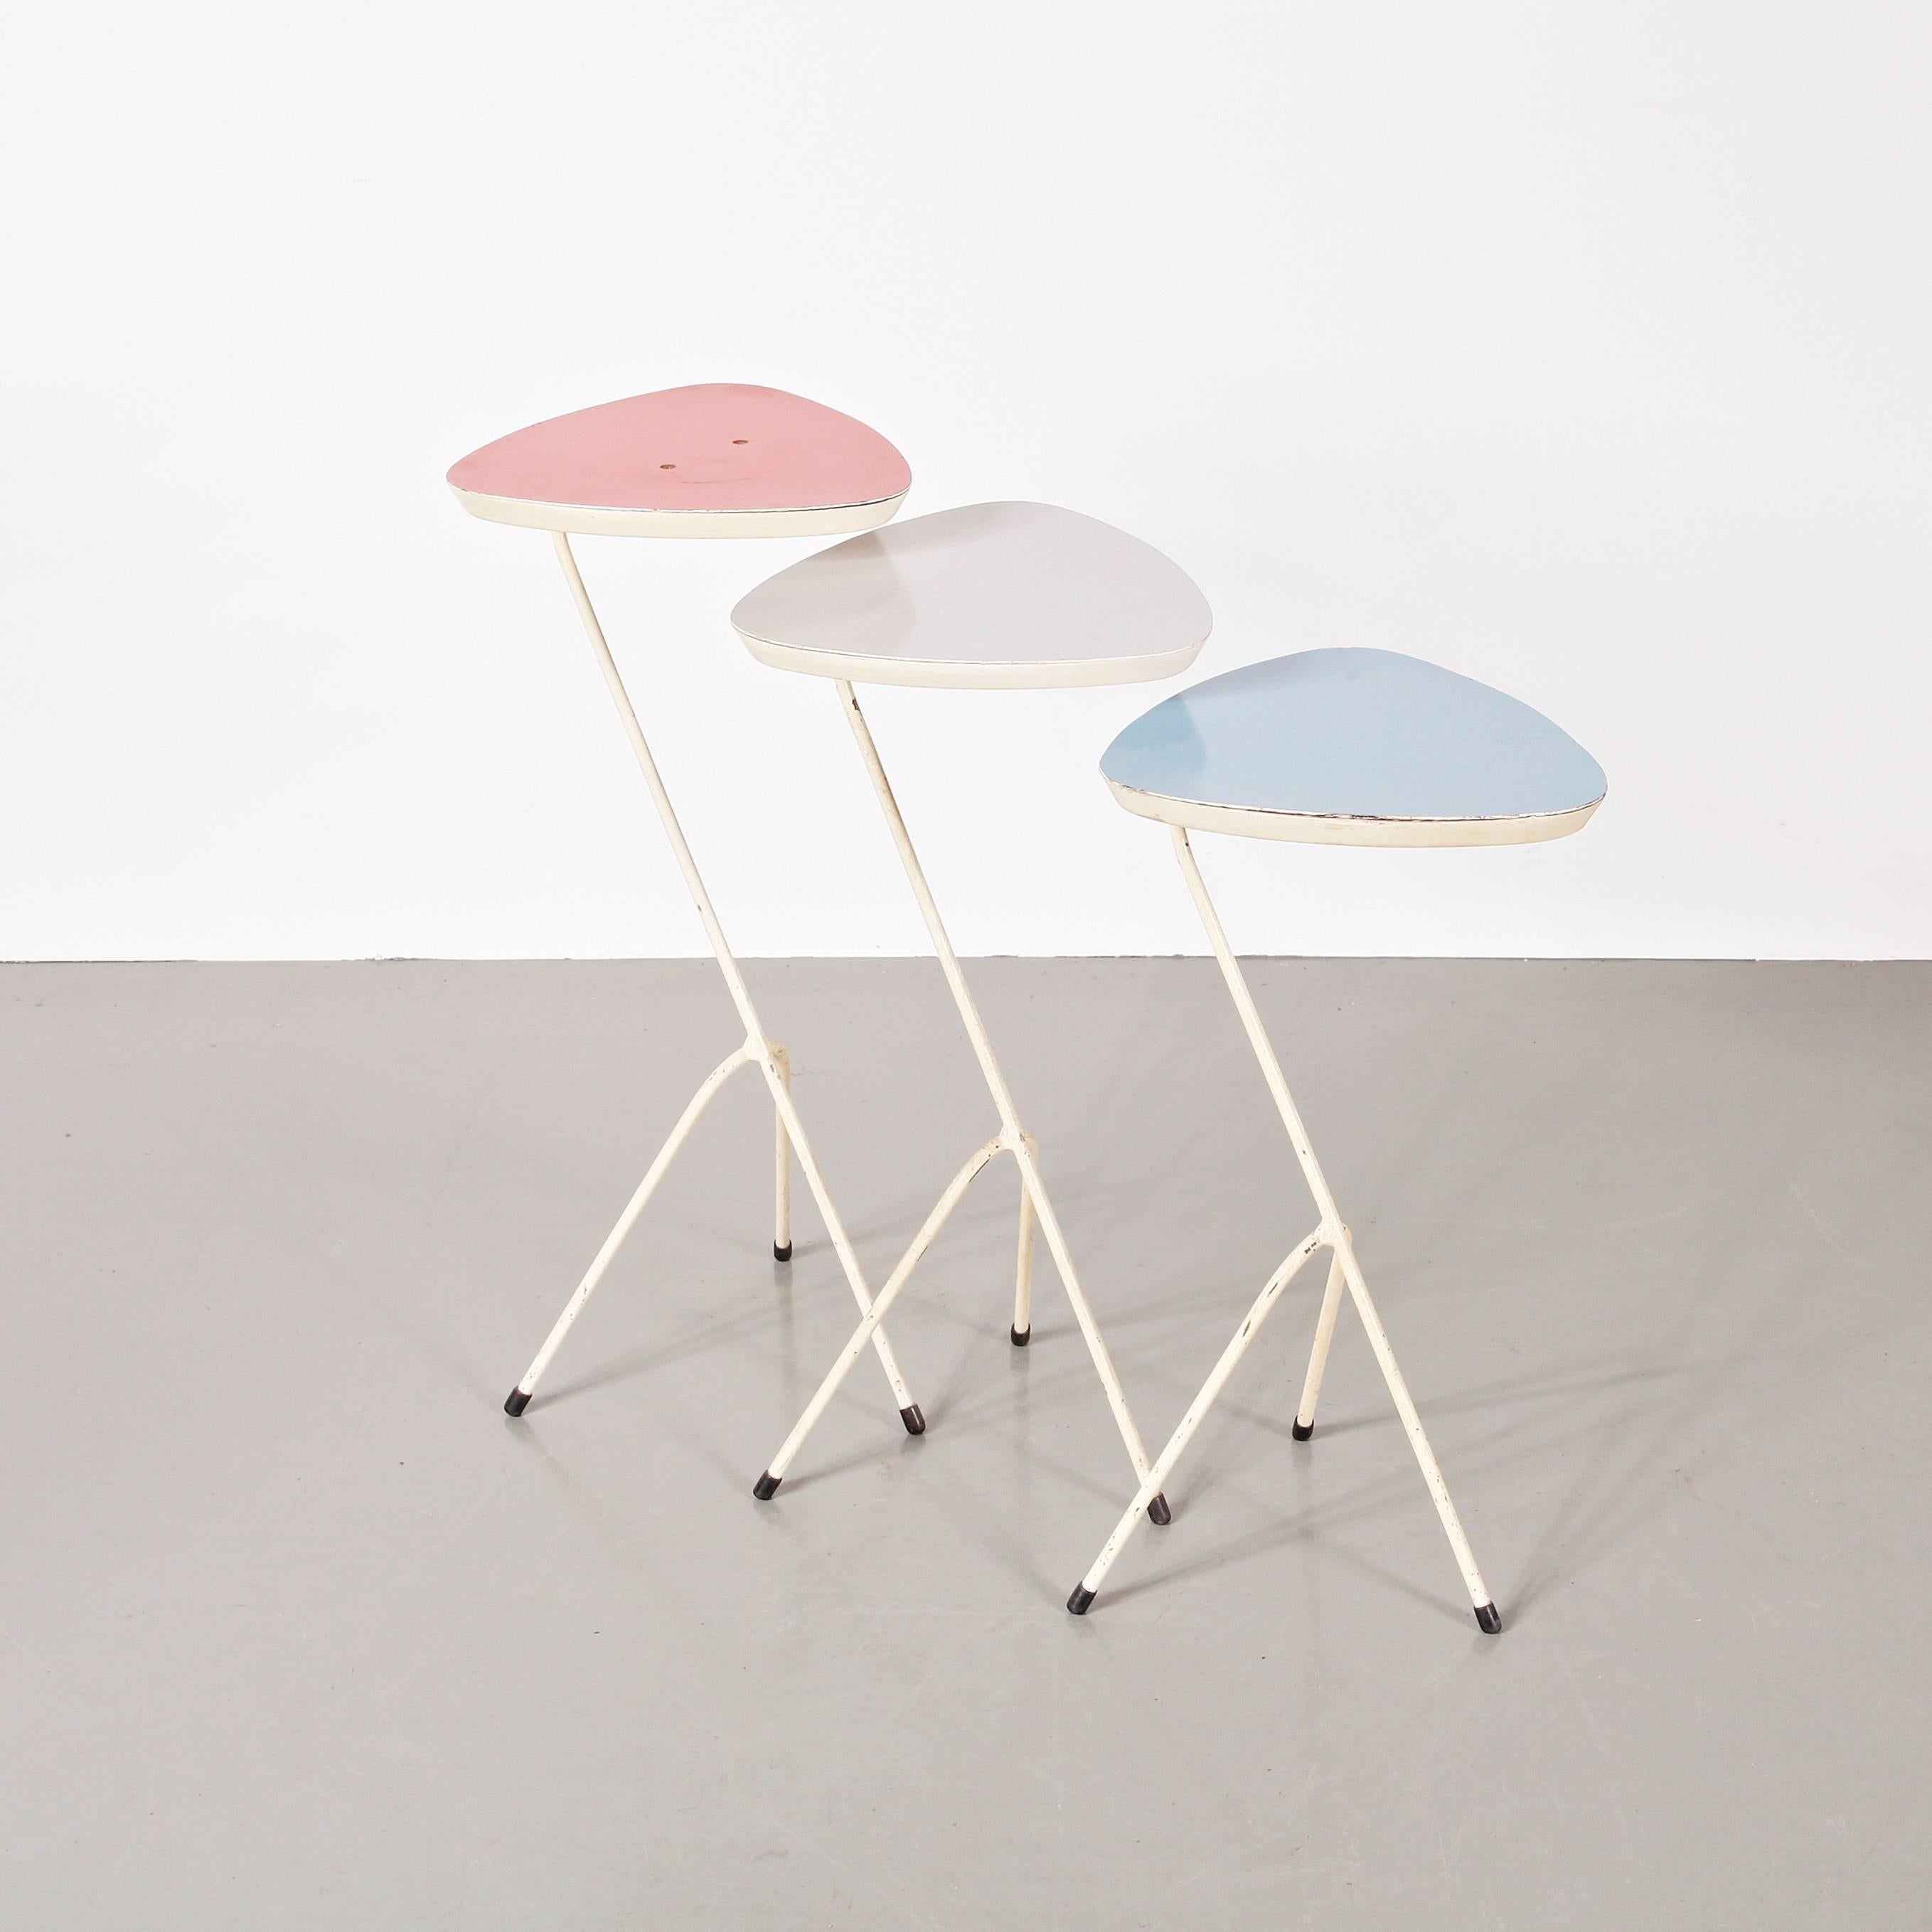 French Set of Three Formica-Topped Nesting Tables by Coen de Vries